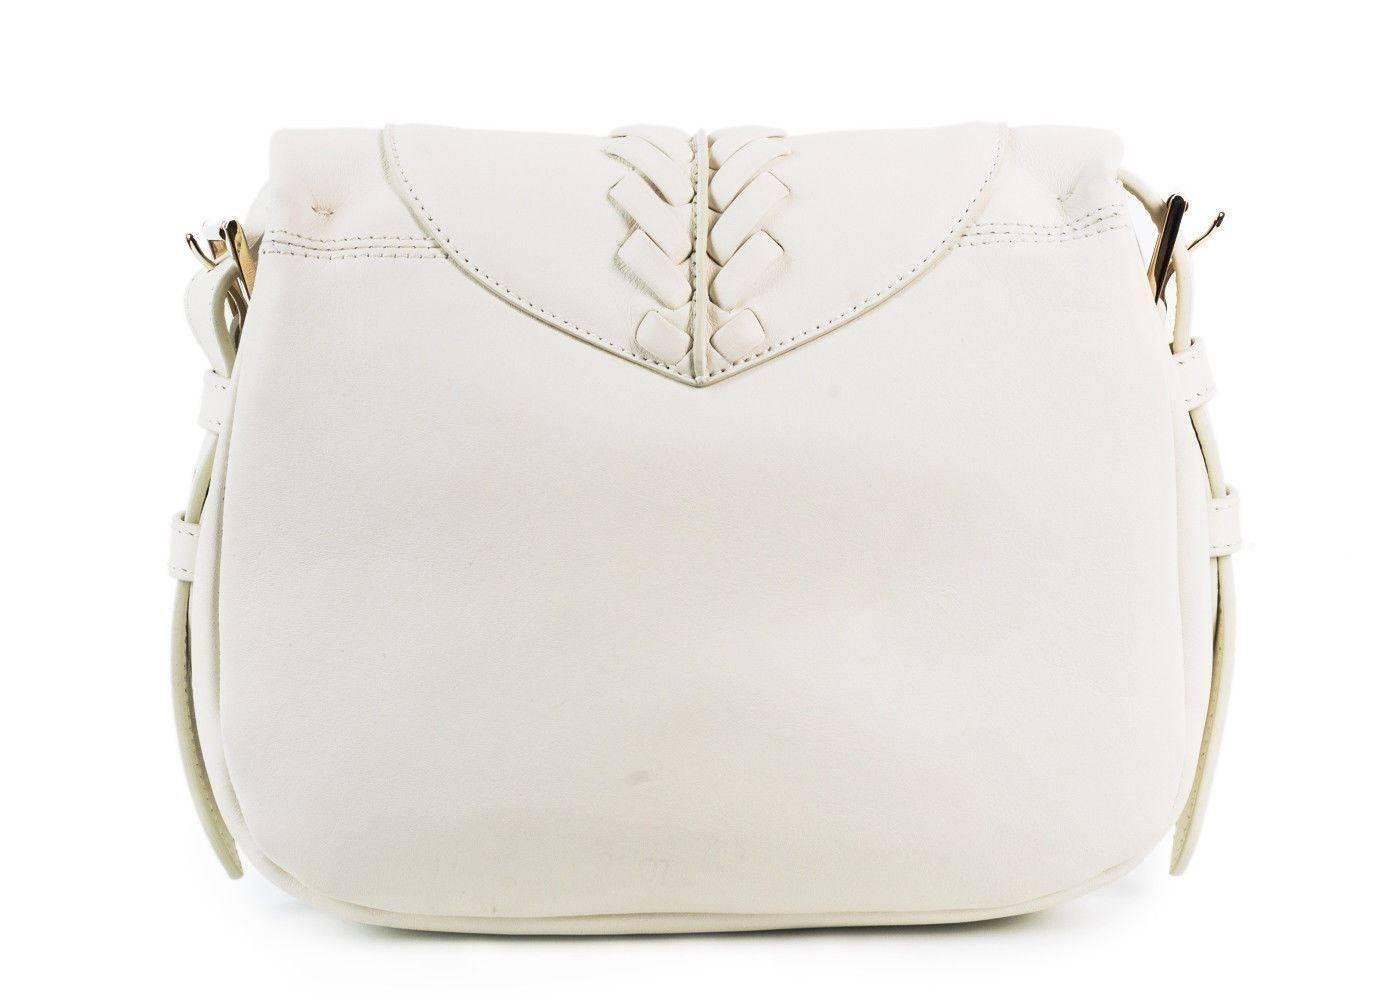 Brand New Roberto Cavalli Cross-body Saddle Bag
Original Tags and Dust Bag Included
Retails In-Stores and Online $815
Dimensions: 9